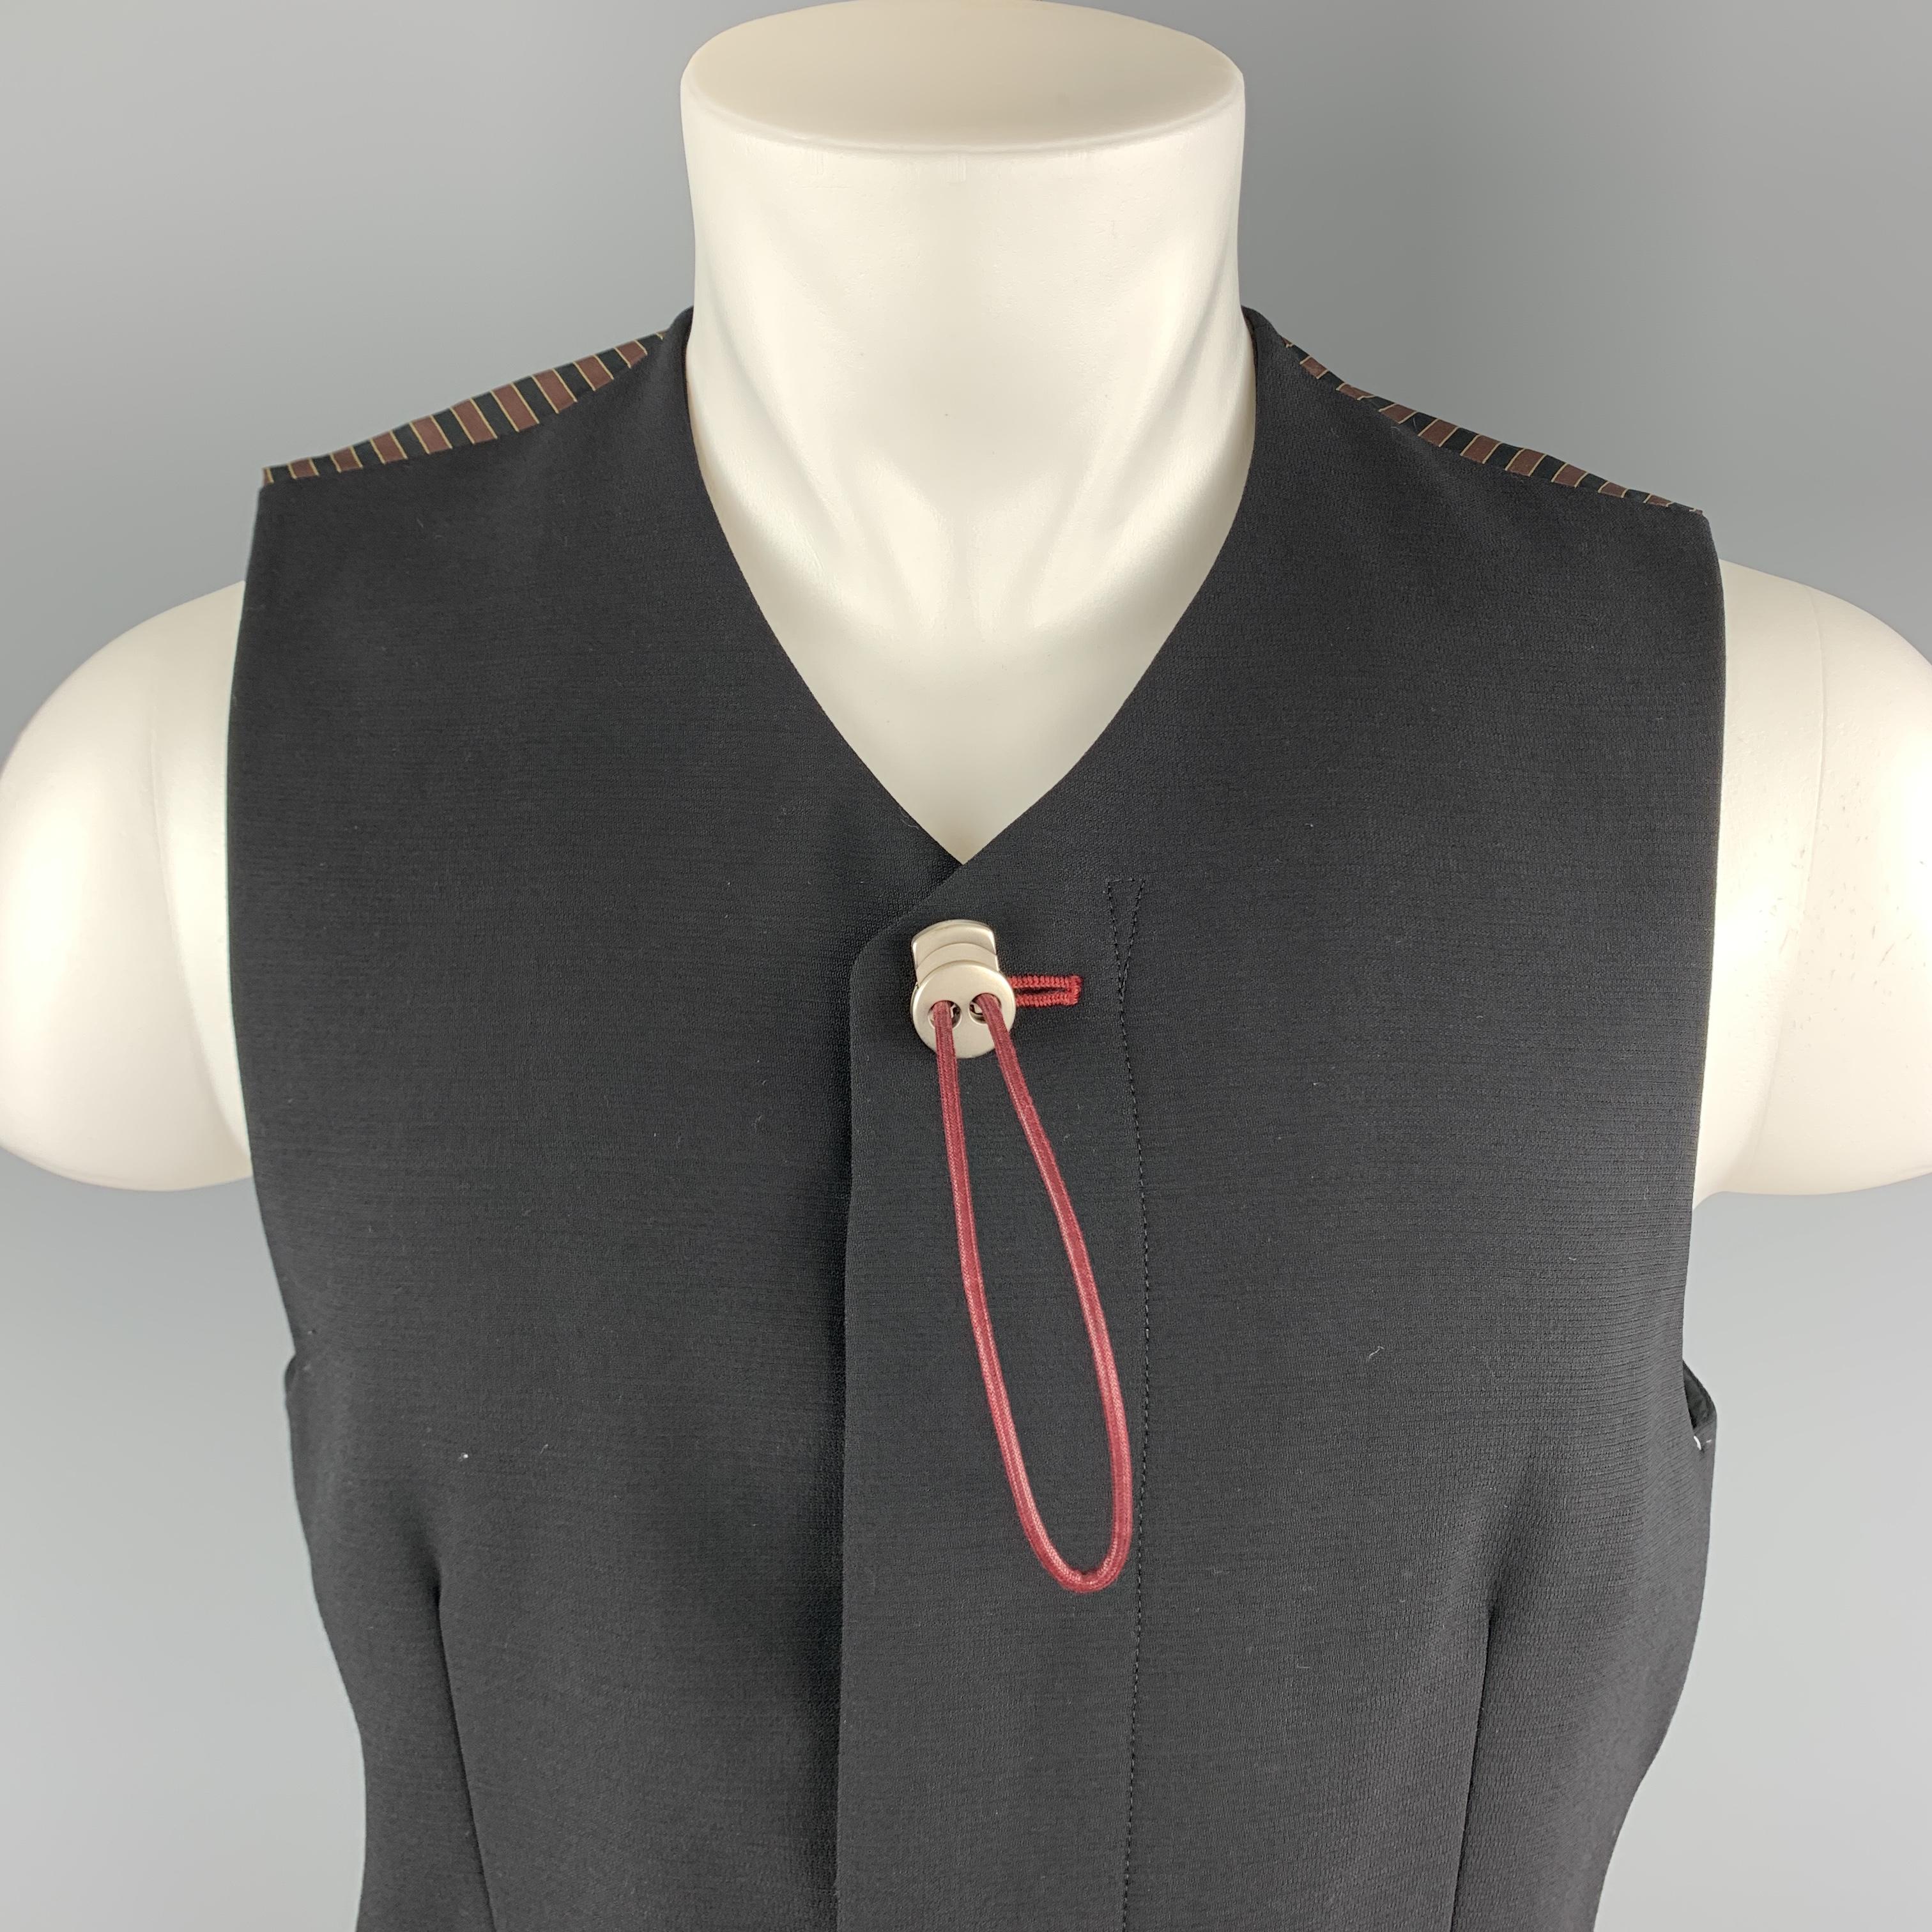 NICOLE BLUB FOR MEN by MATSUDA vest comes in a black crepe featuring a adjustable string button detail, slit pockets, plaid print back, back belt, and a hidden button closure.

Very Good Pre-Owned Condition.
Marked: M

Measurements:

Shoulder: 14